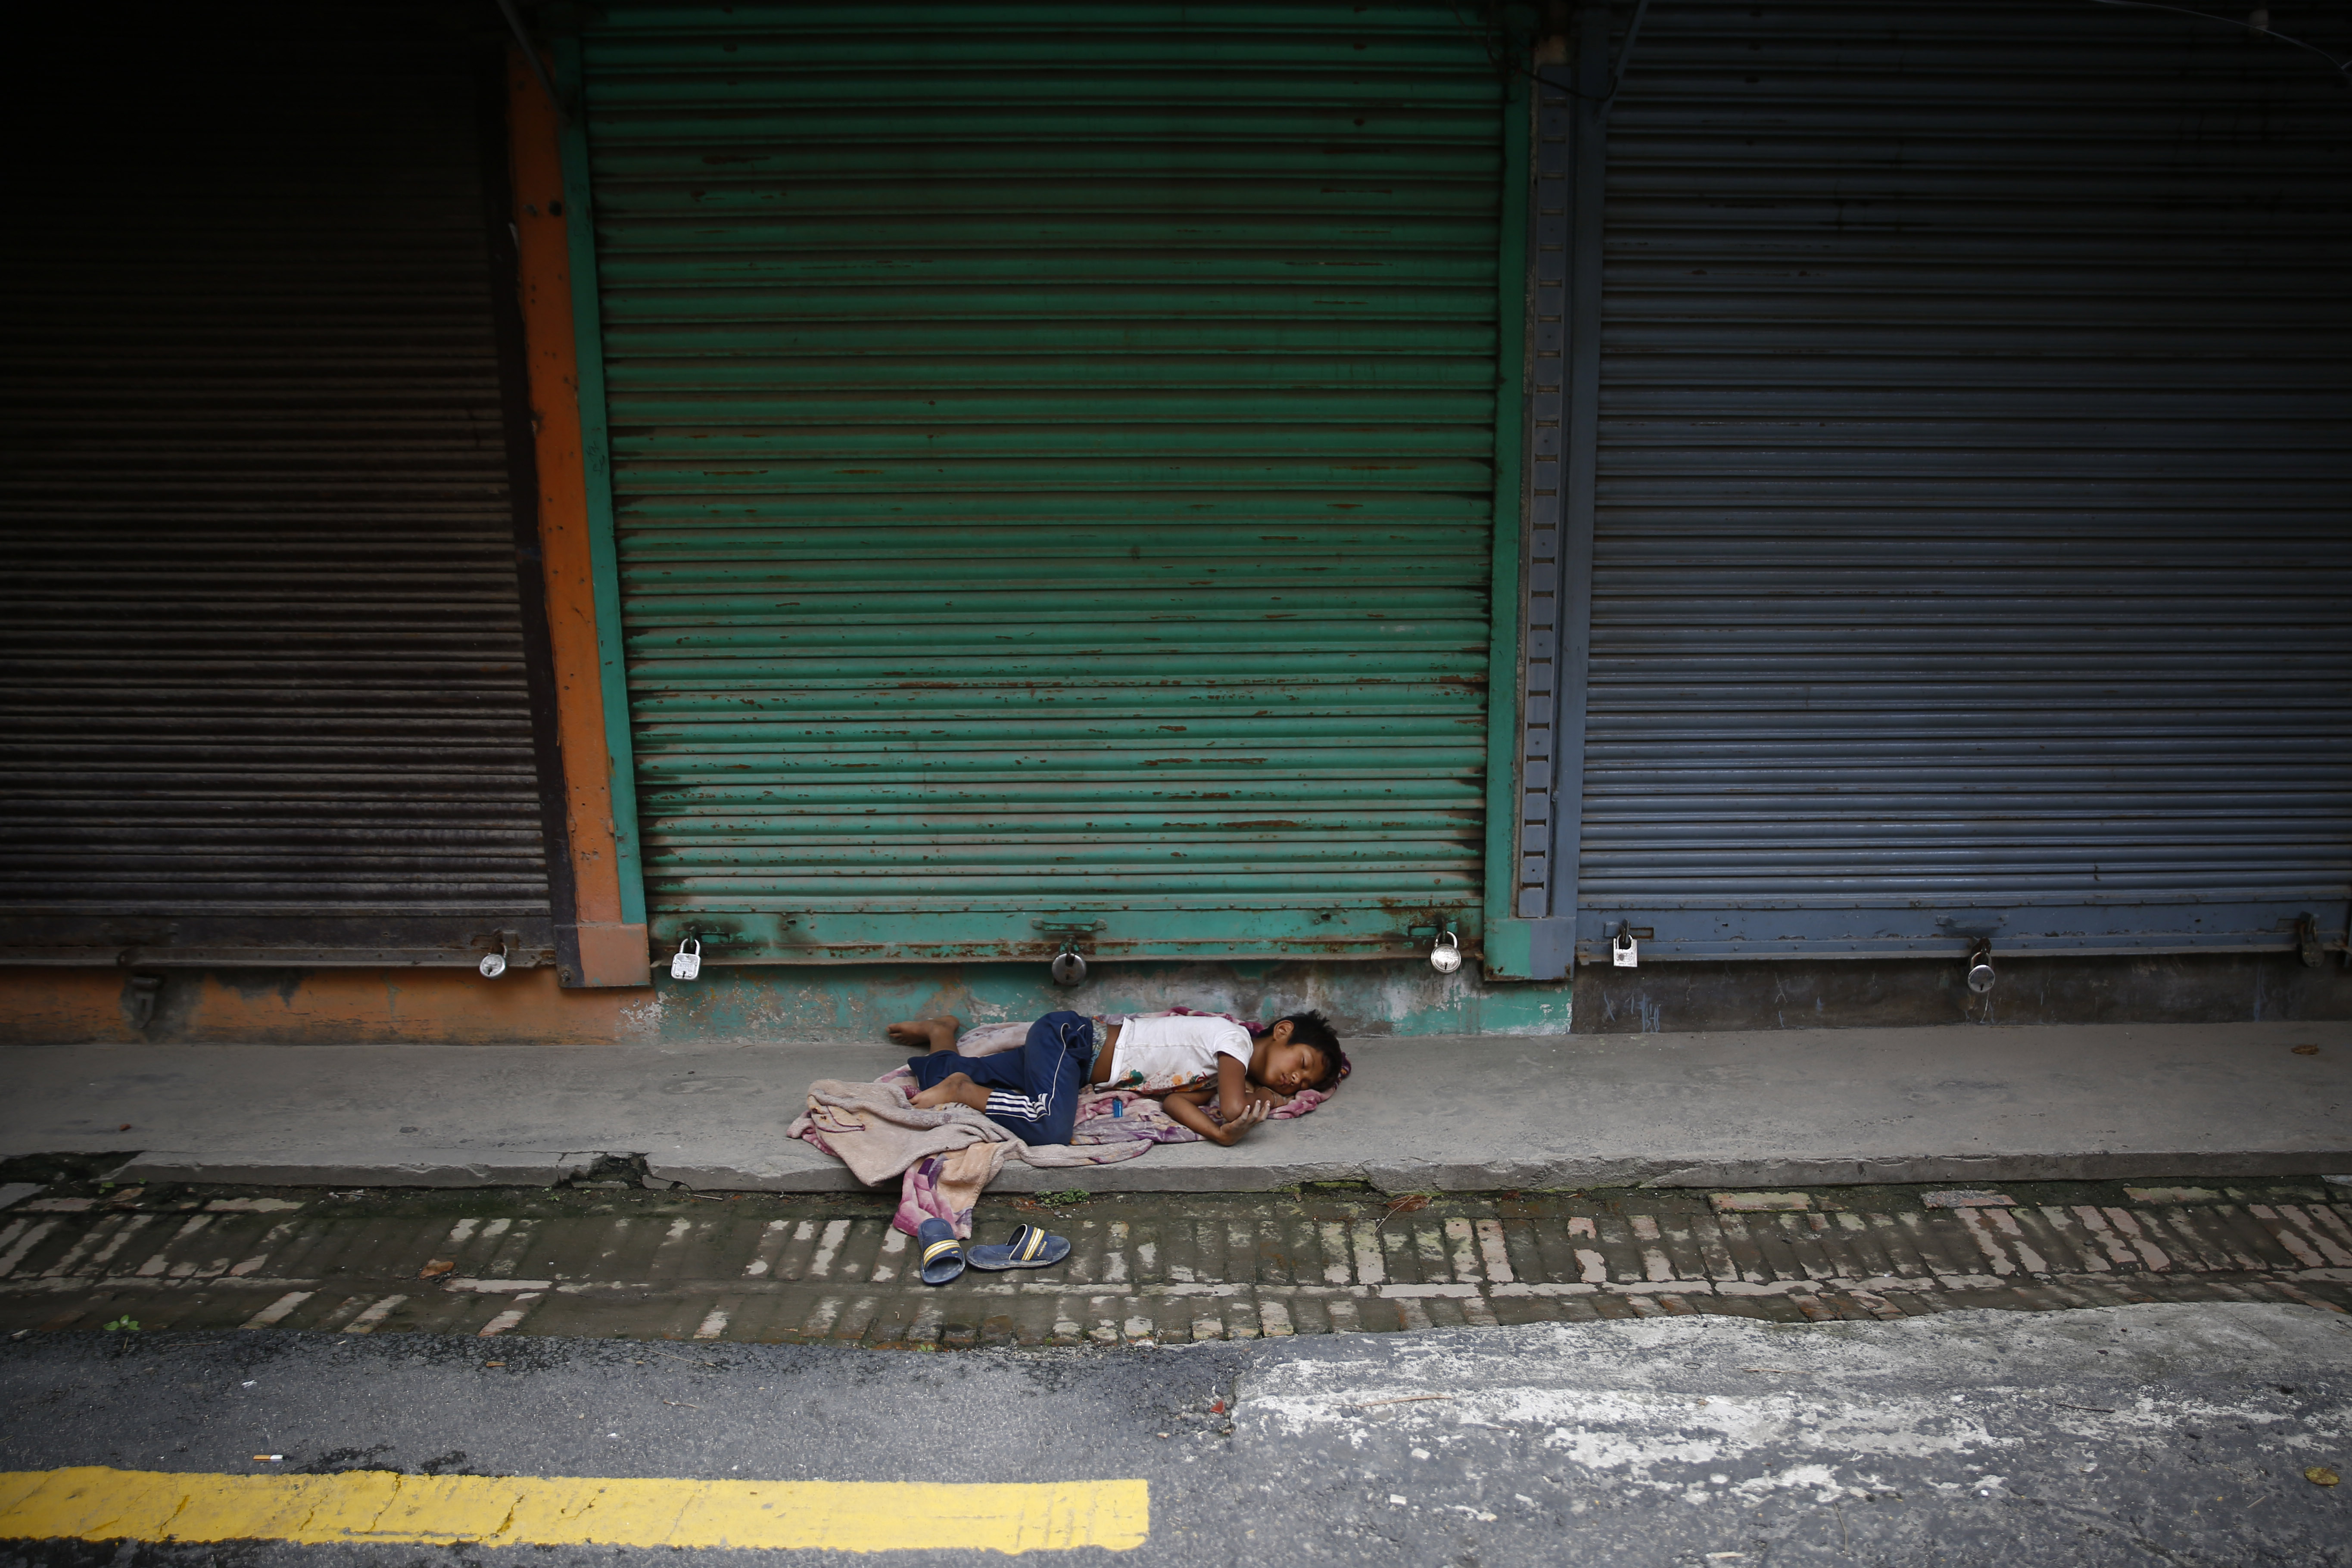 A street child sleeps in front of shuttered shops at Thamel, a tourist hub, after the government re-imposed a lockdown amid concerns over the spread of coronavirus disease in Kathmandu, on Friday, August 28, 2020. Photo: Skanda Gautam/THT